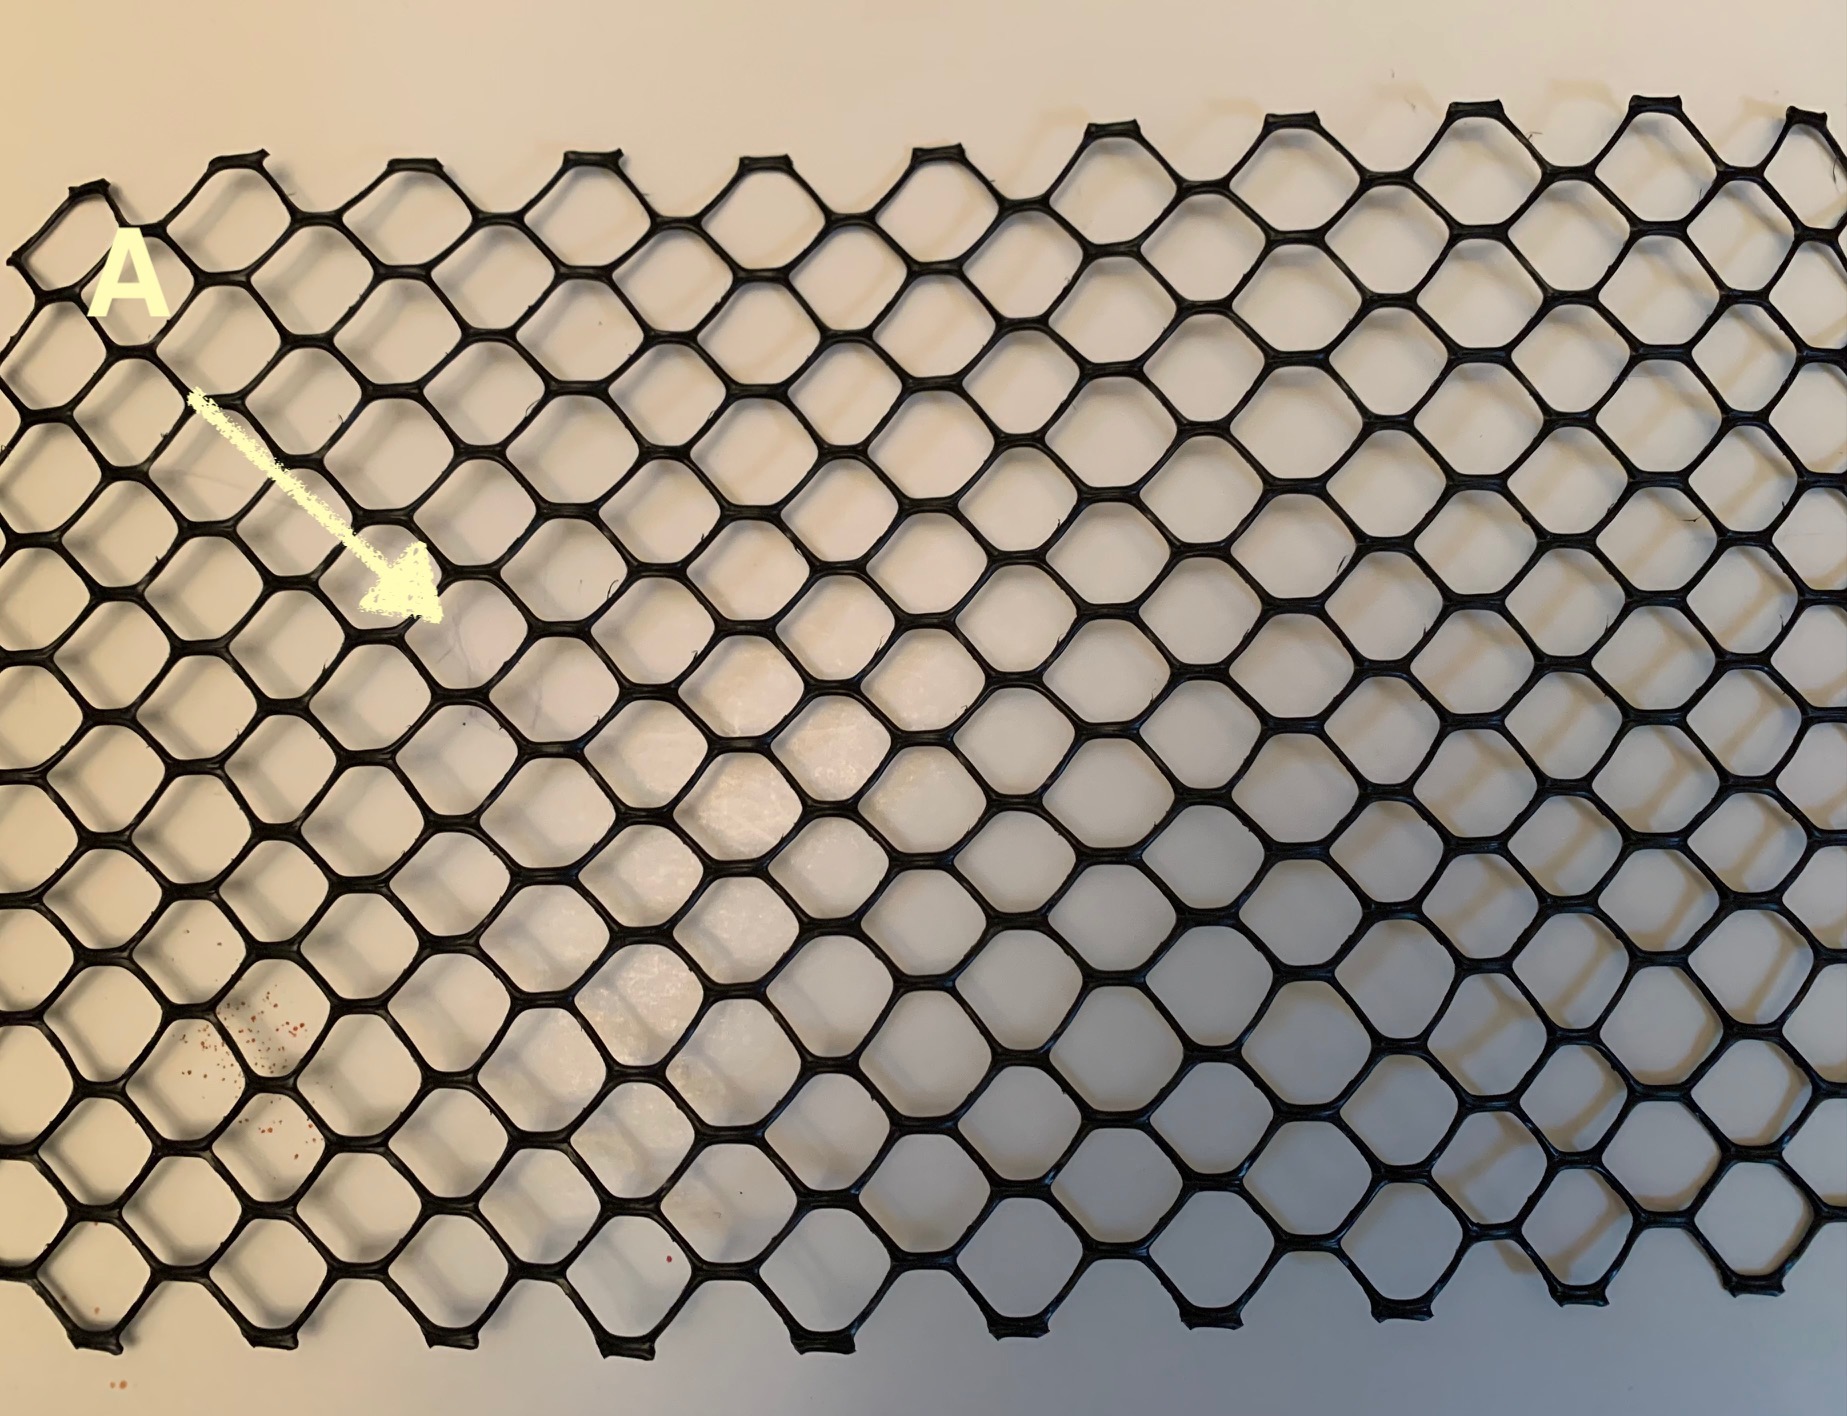 Using the "graphene" sheet if we wrap the sheet starting at A in the direction of the arrow (left; counter-clockwise) we will produce the chiral wrap at right. 